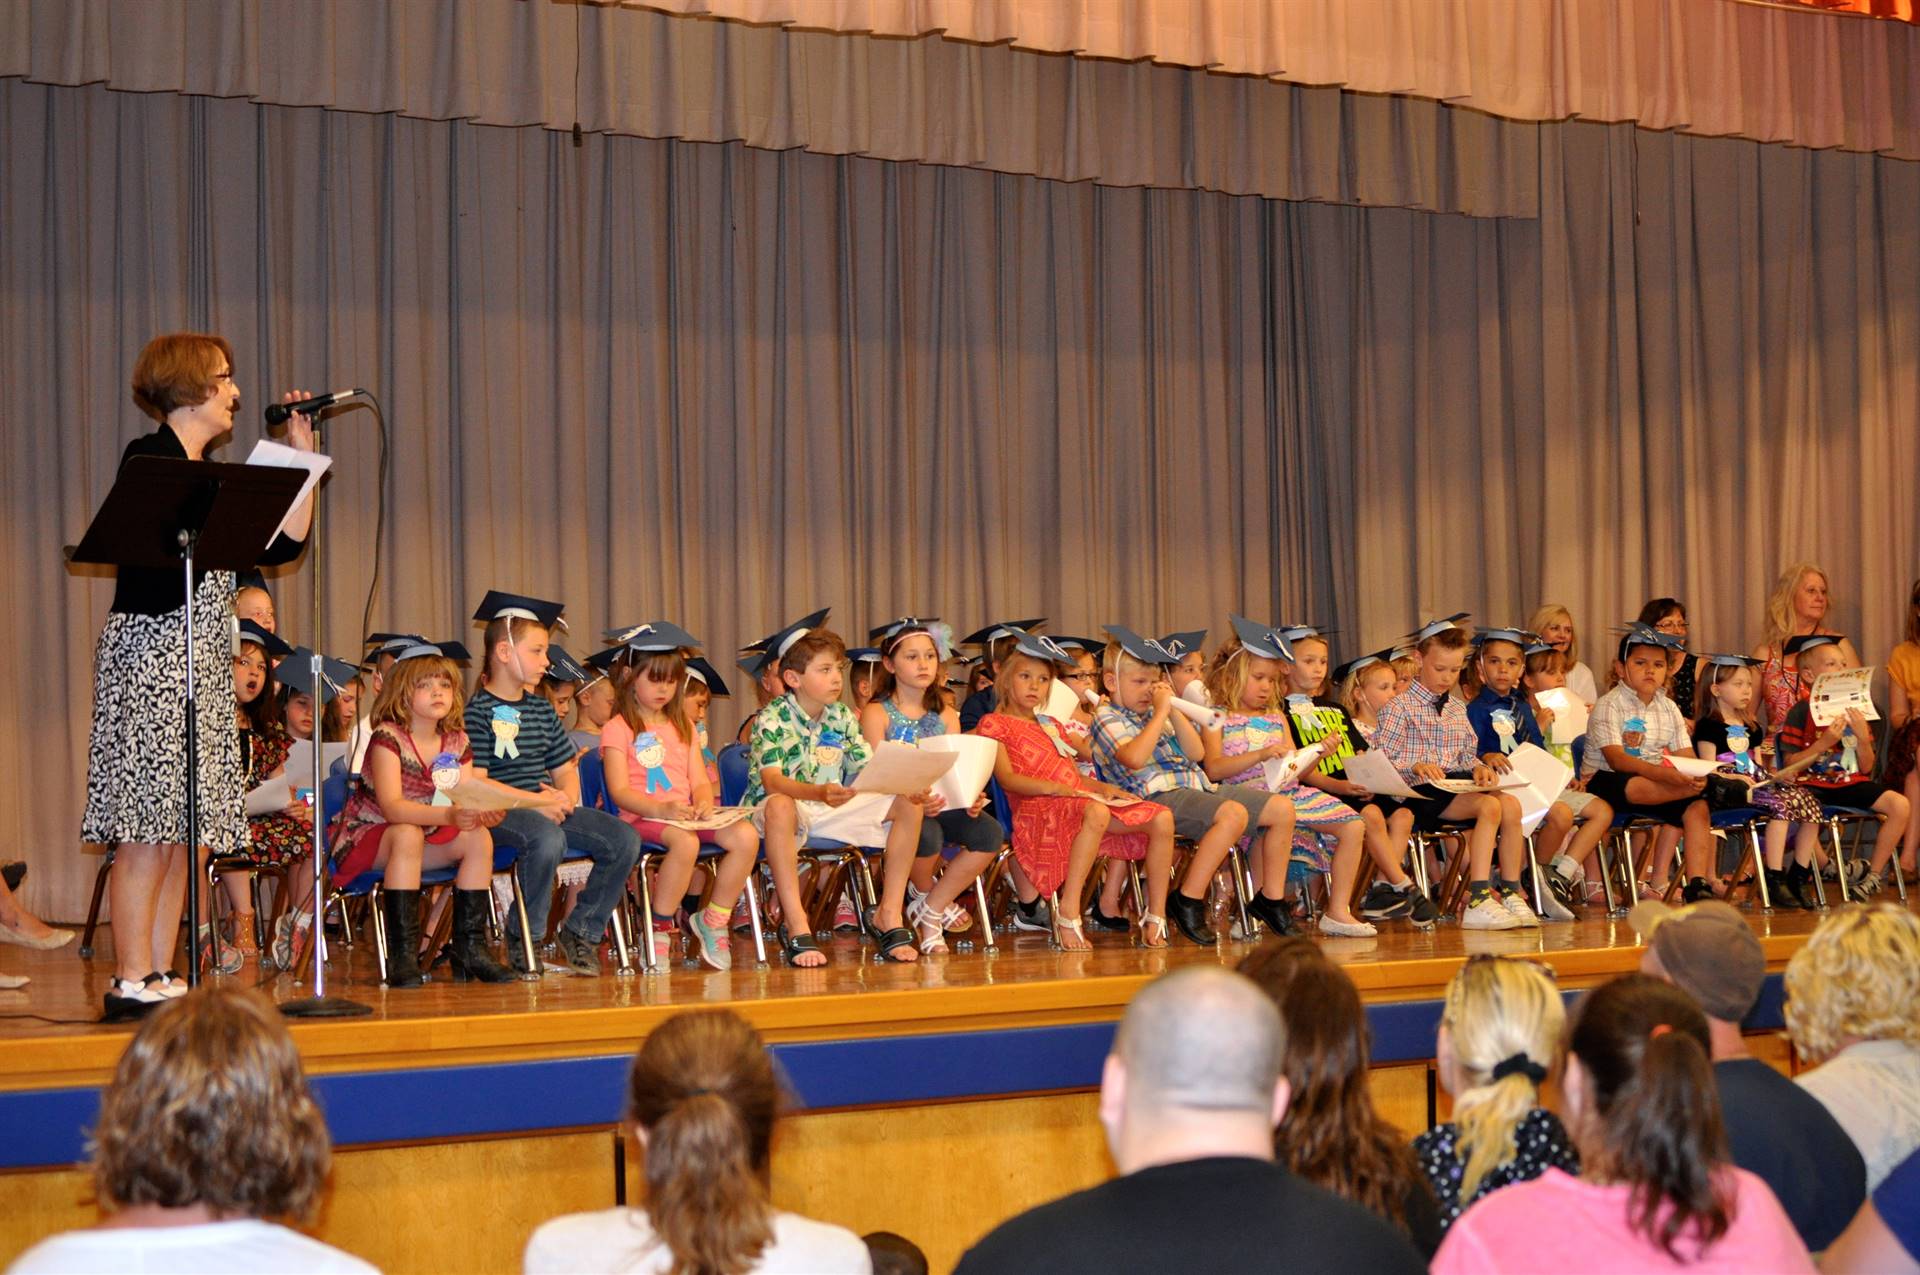 A teacher speaks on stage about 2 special helpers while students listen.